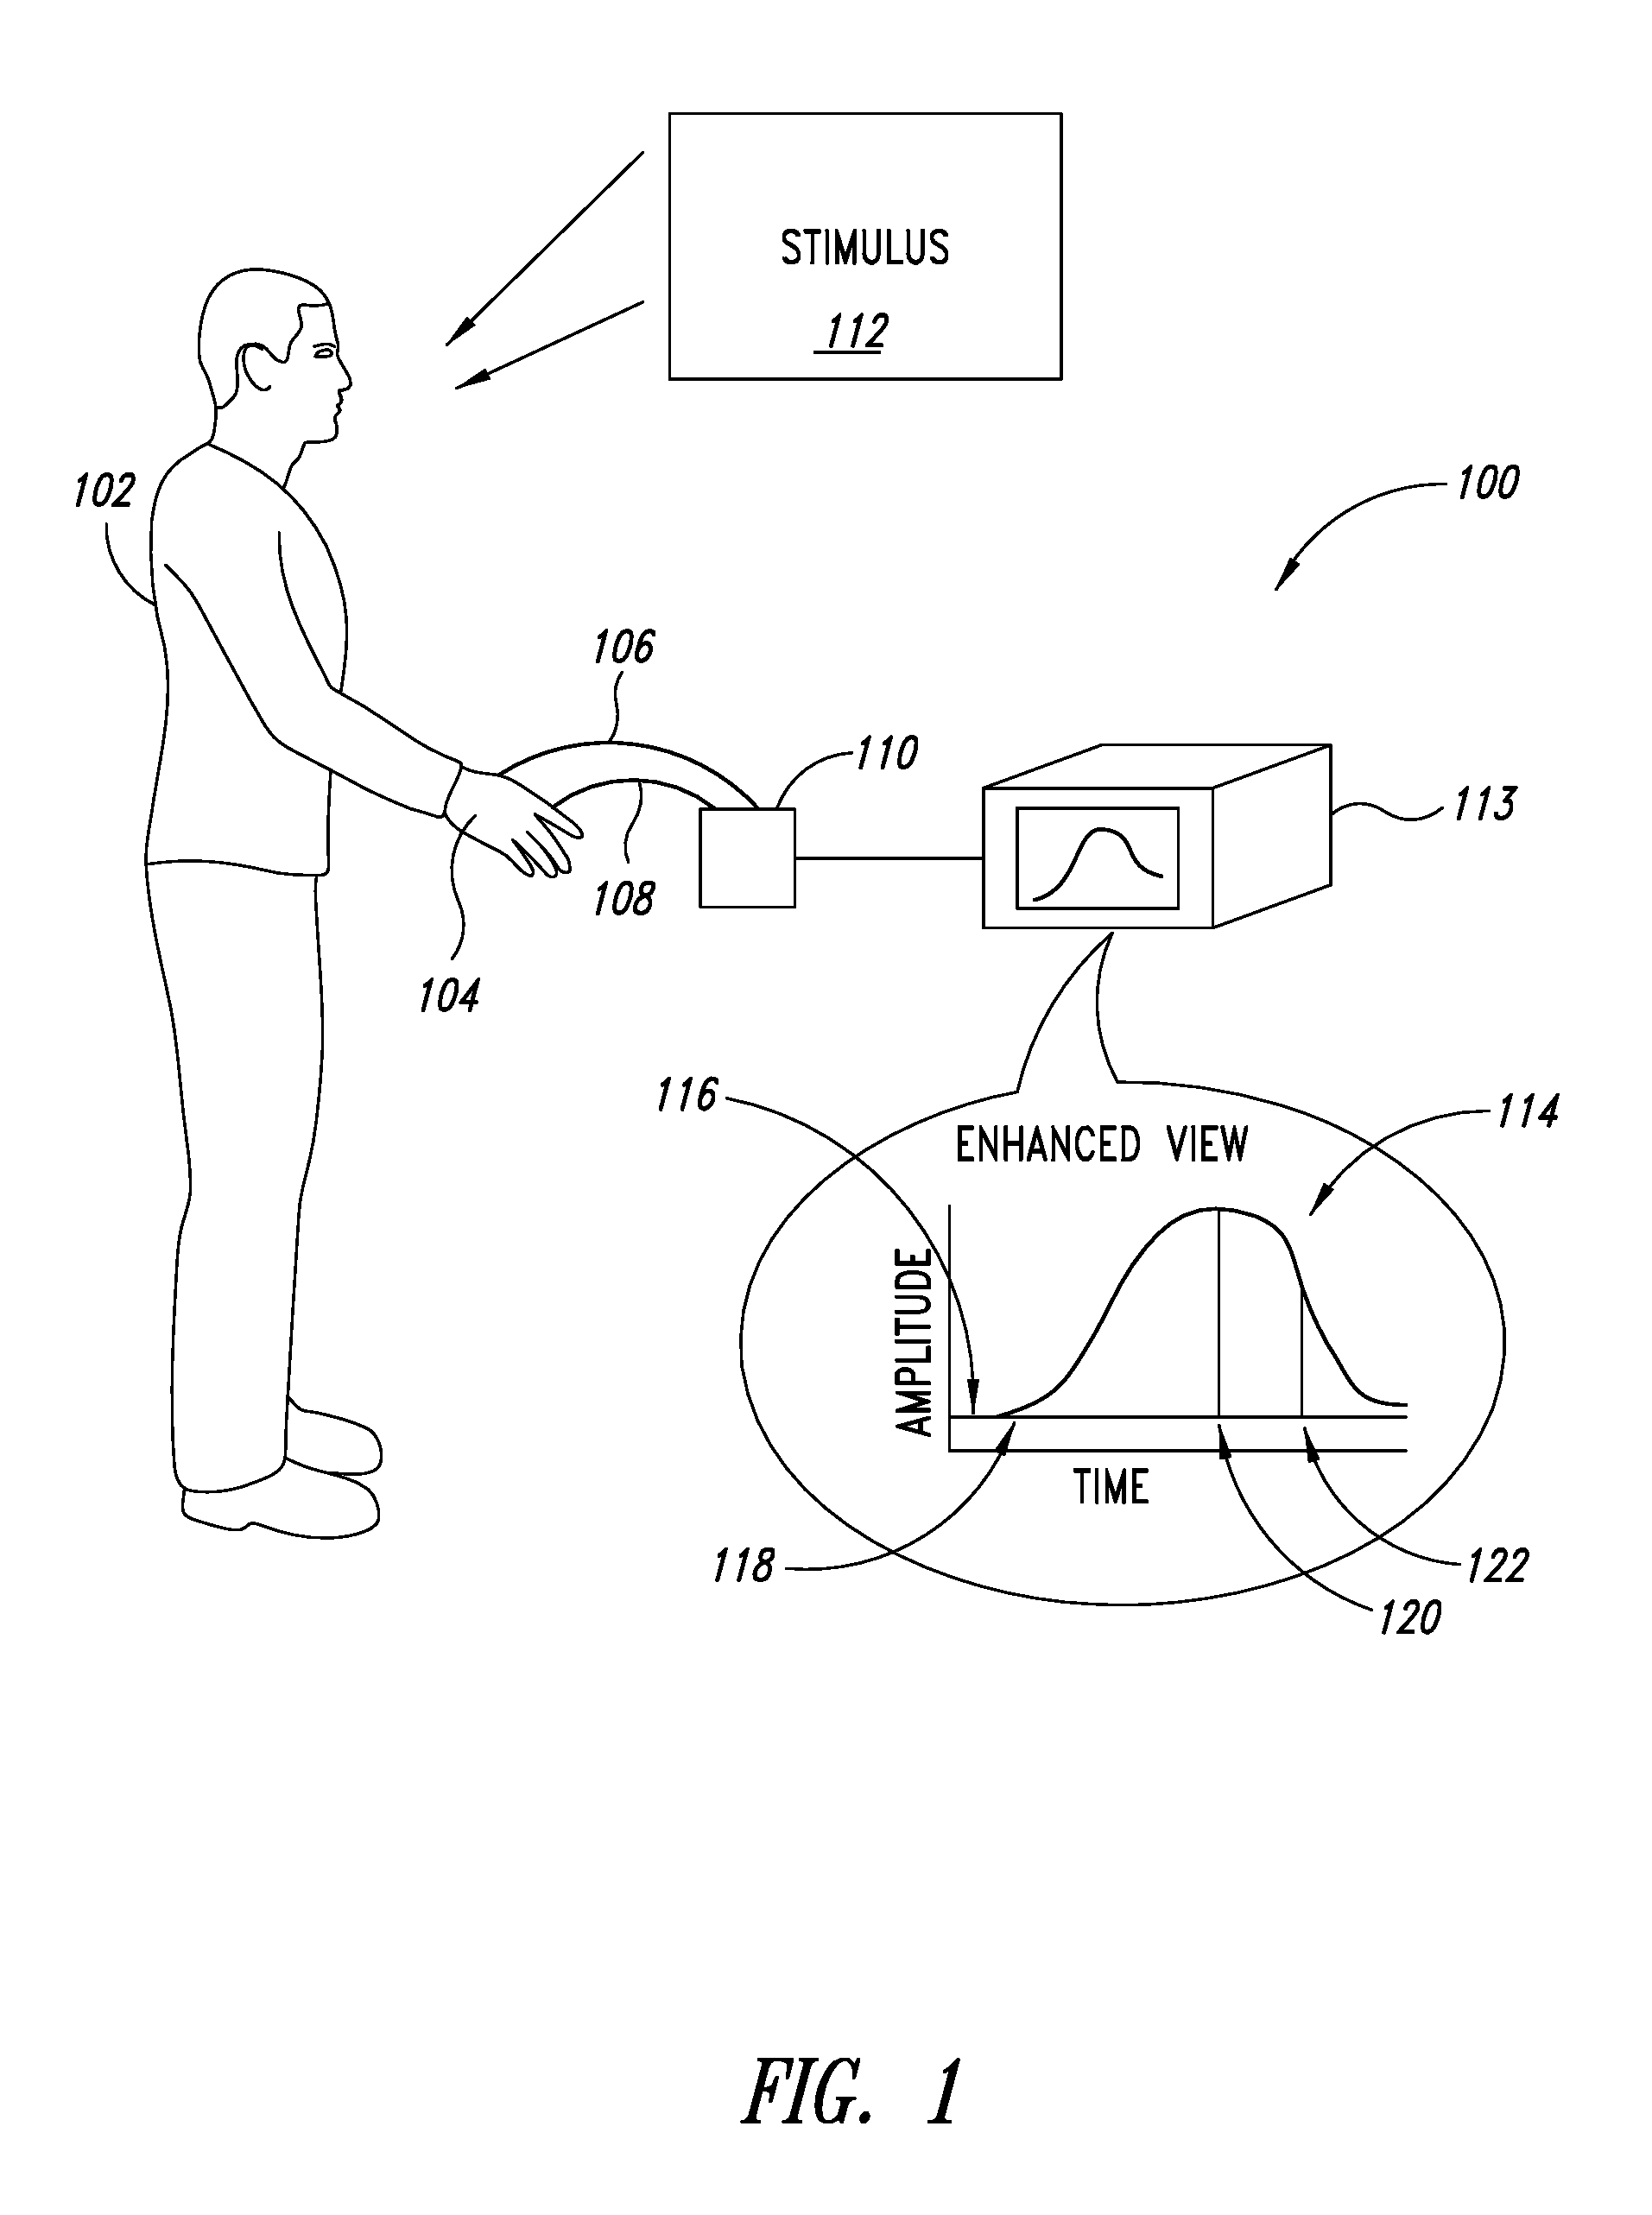 Biofeedback for a gaming device, such as an electronic gaming machine (EGM)